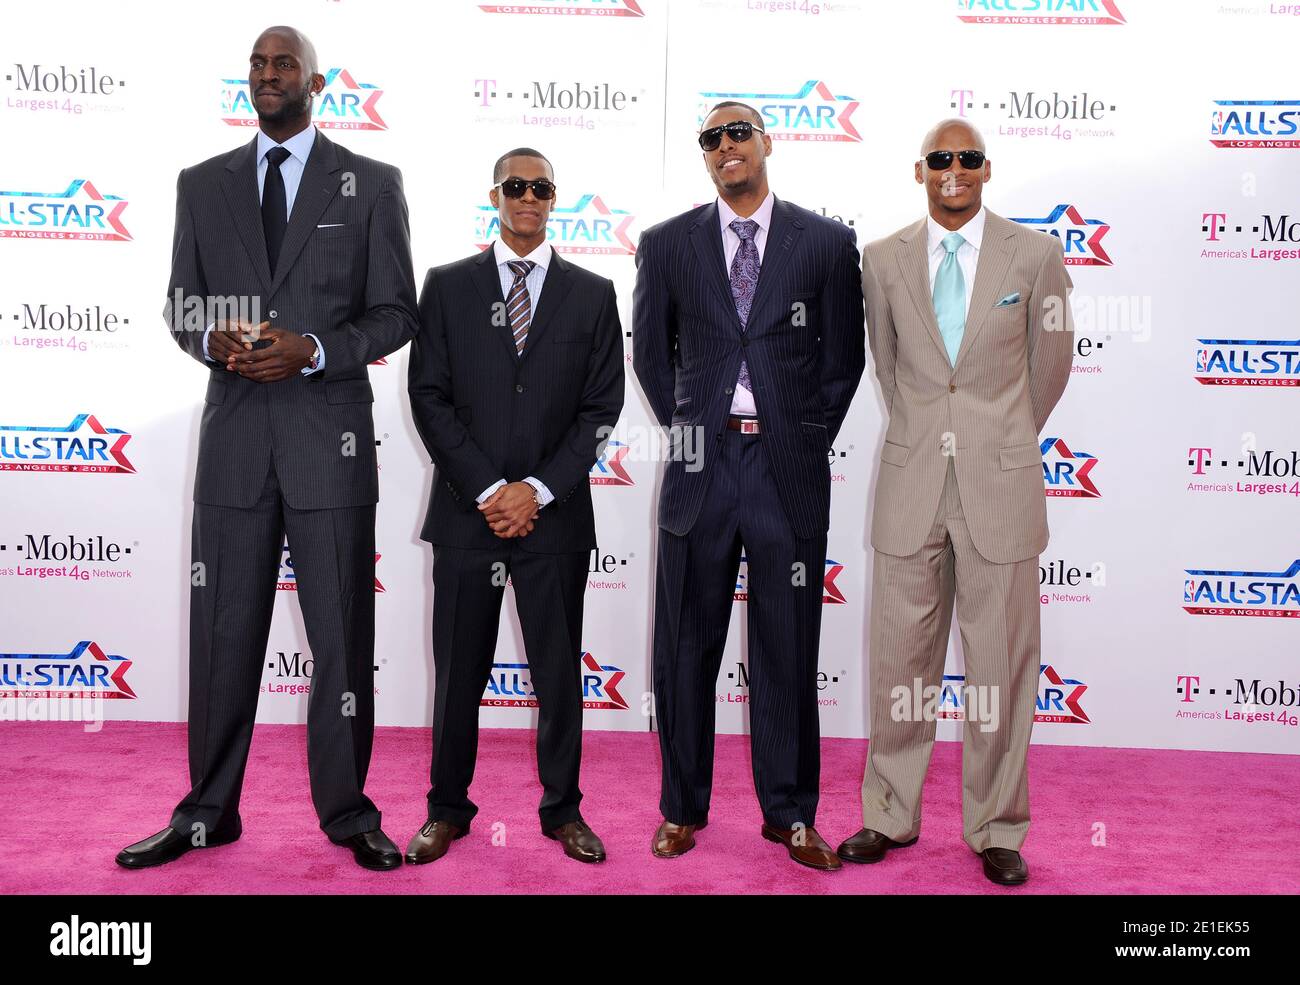 Kevin Garnett, Rajon Rondo, Paul Pierce and Ray Allen arriving at the 2011 NBA All-Star Game held at the Staples Center downtown Los Angeles, February 20, 2011. Photo by Lionel Hahn/AbacaUsa.com Stock Photo